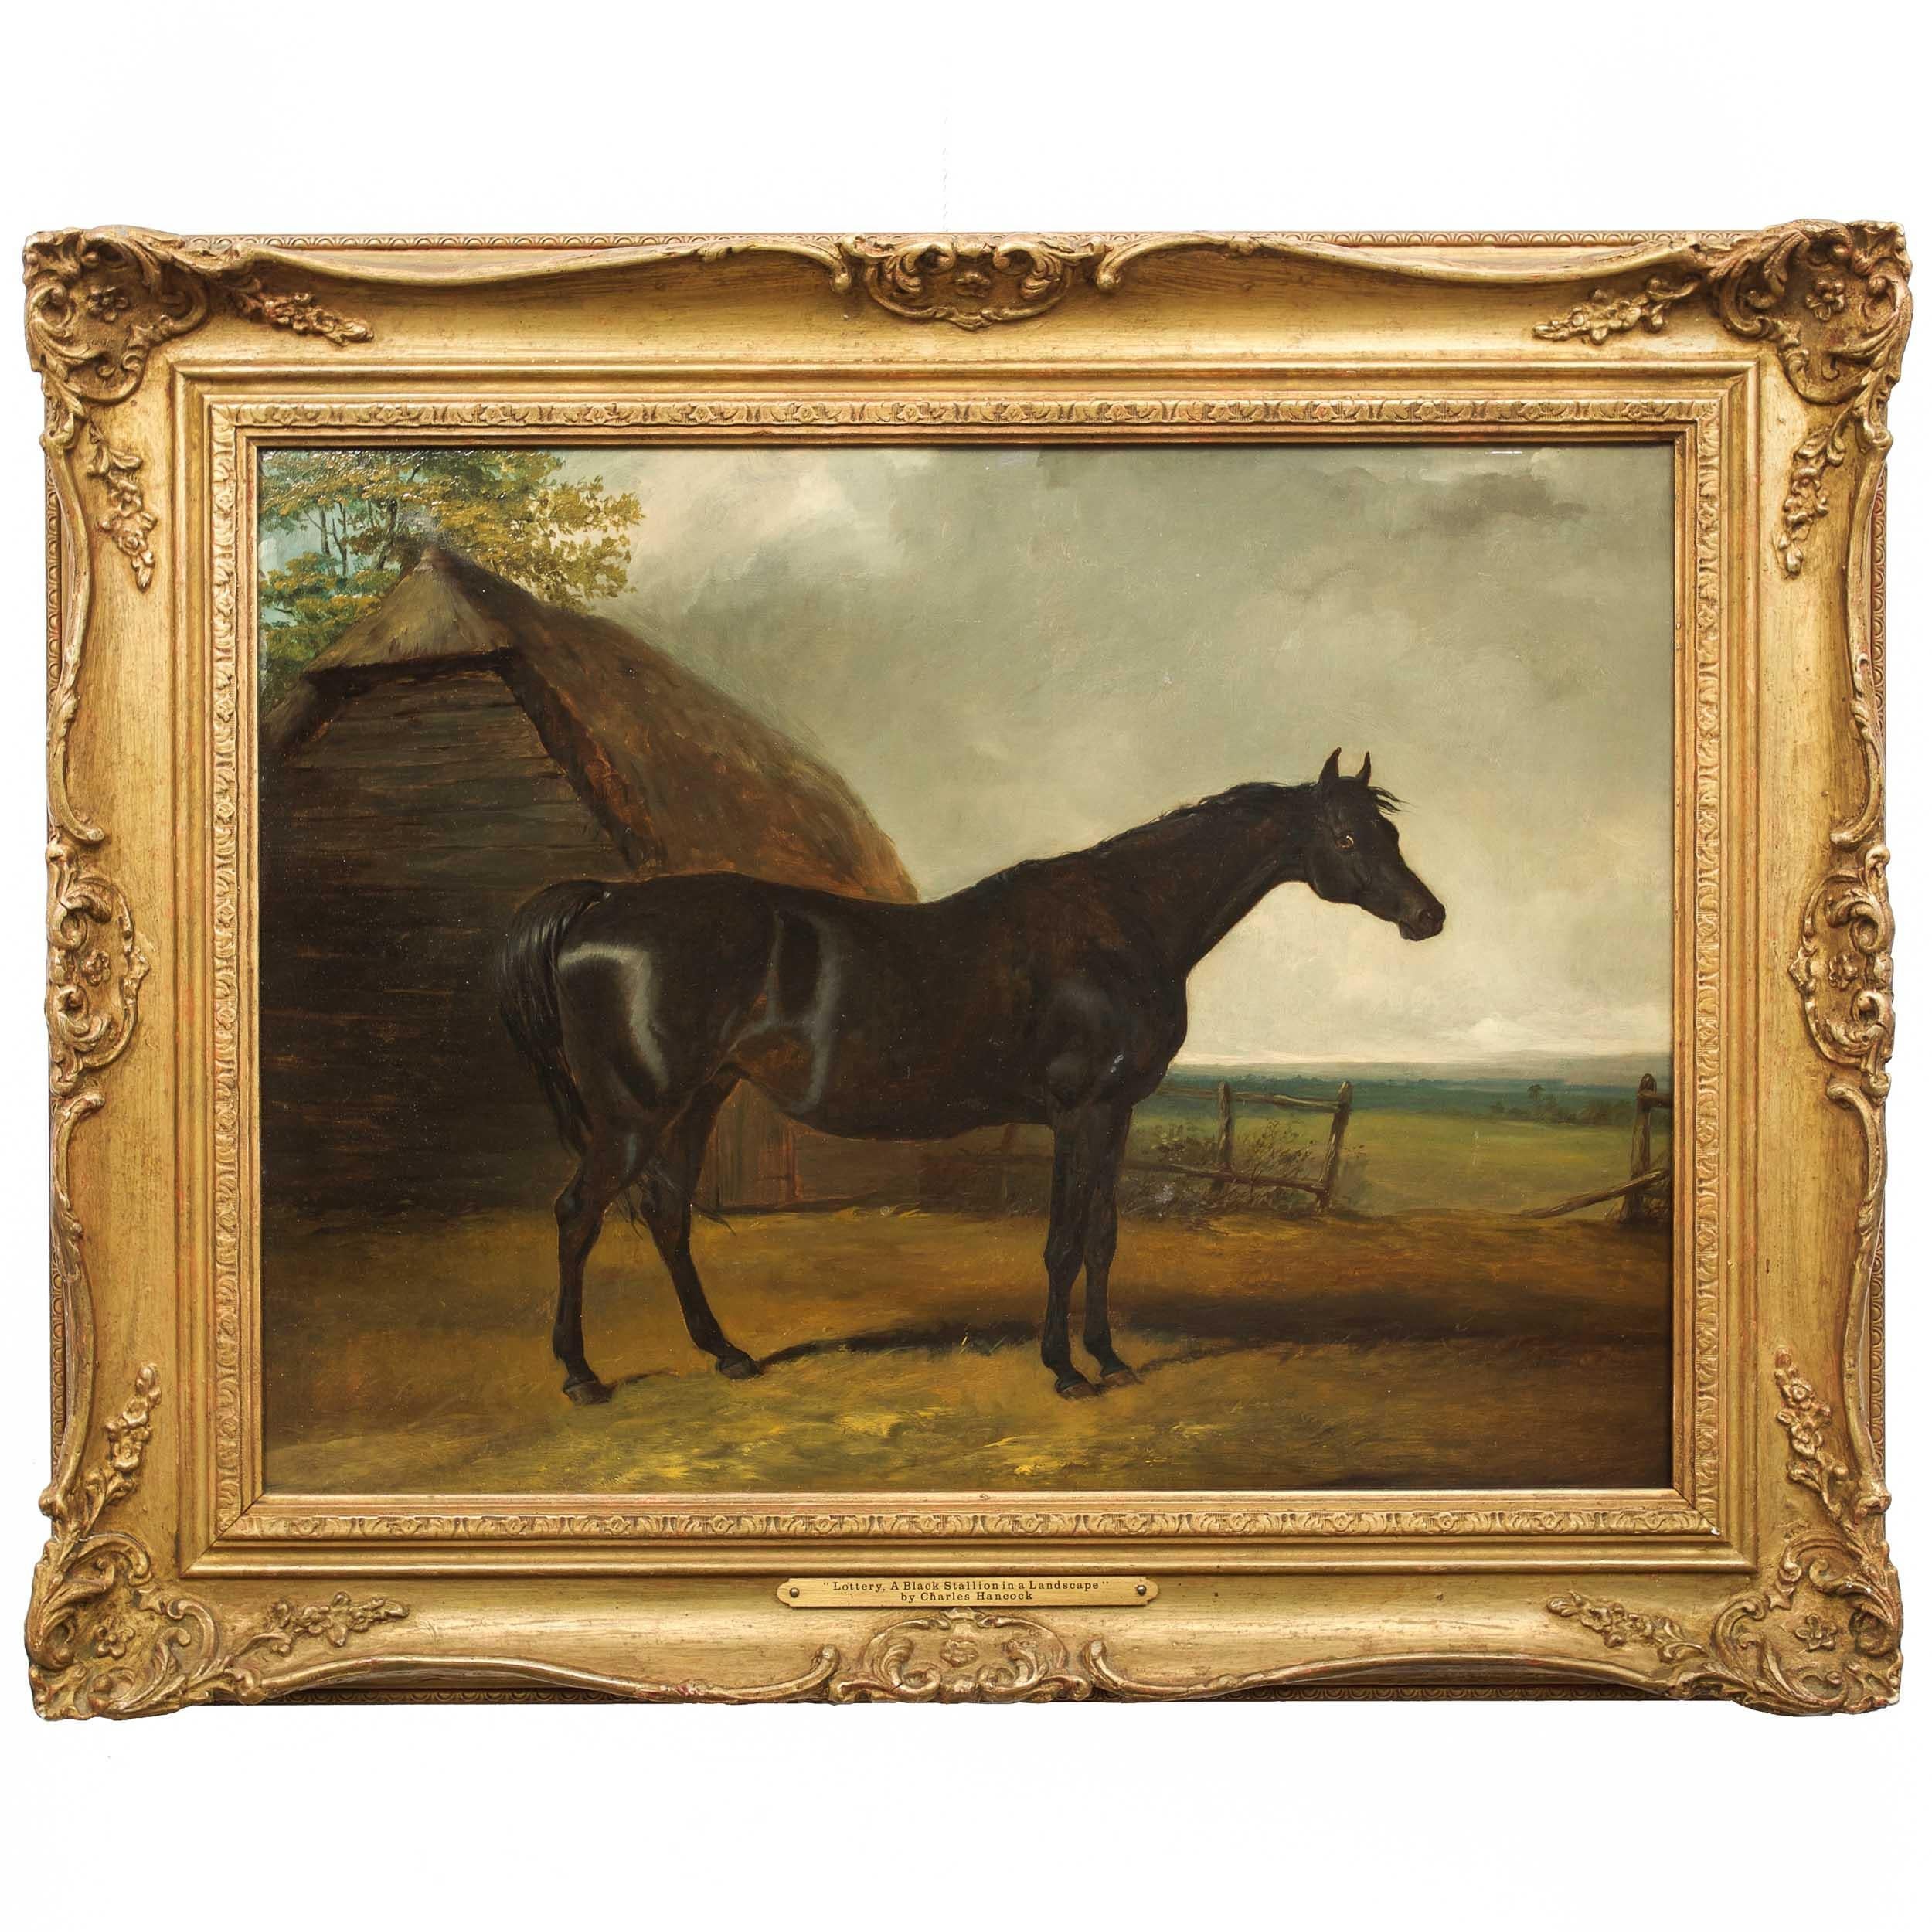 A fine depiction of a black stallion racehorse standing in a landscape before an aged barn with a thatched roof, it is executed in oil on artist panel supplied by Thomas Brown (London, 1778-1840) at some point prior to the release of his leasehold